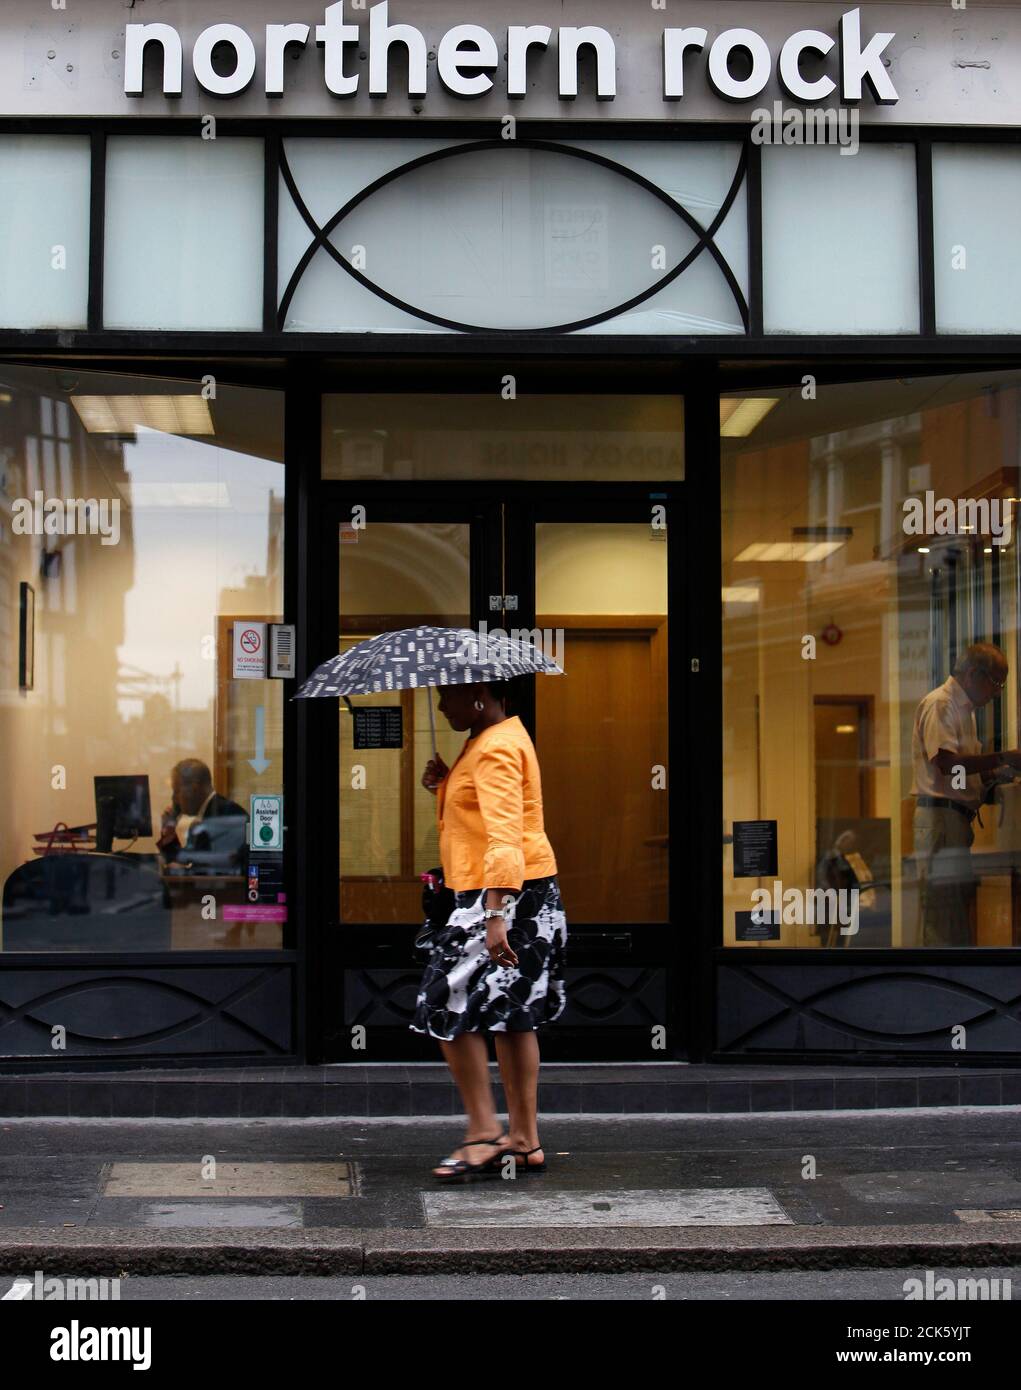 A pedestrian walks past a branch of the Northern Rock bank in central London August 4, 2009. British bank Northern Rock said on Tuesday its first-half losses rose almost 24 percent, as delays to EU approval for its state-backed turnaround hit funding costs and held back its ability to help revive the UK mortgage market.  REUTERS/Stefan Wermuth (BRITAIN BUSINESS) Stock Photo